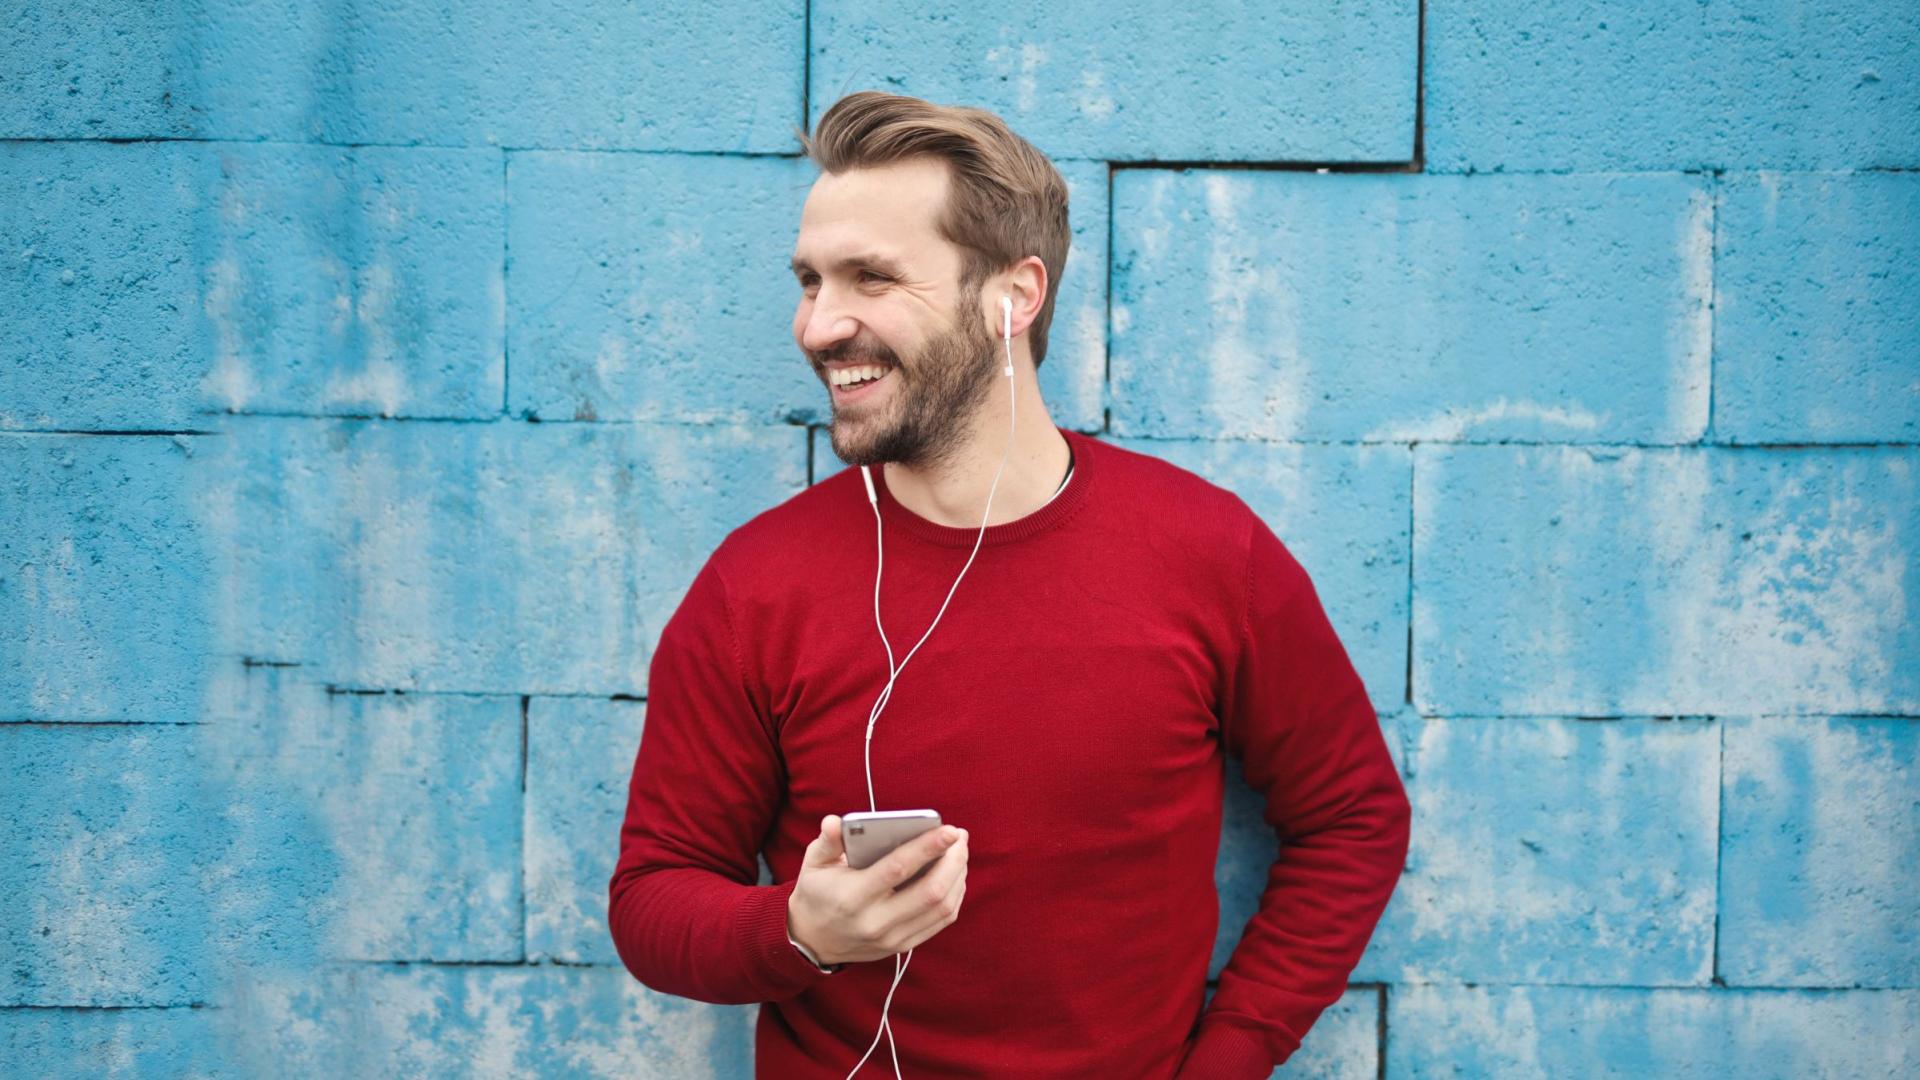 Middle-aged man holding his phone smiling